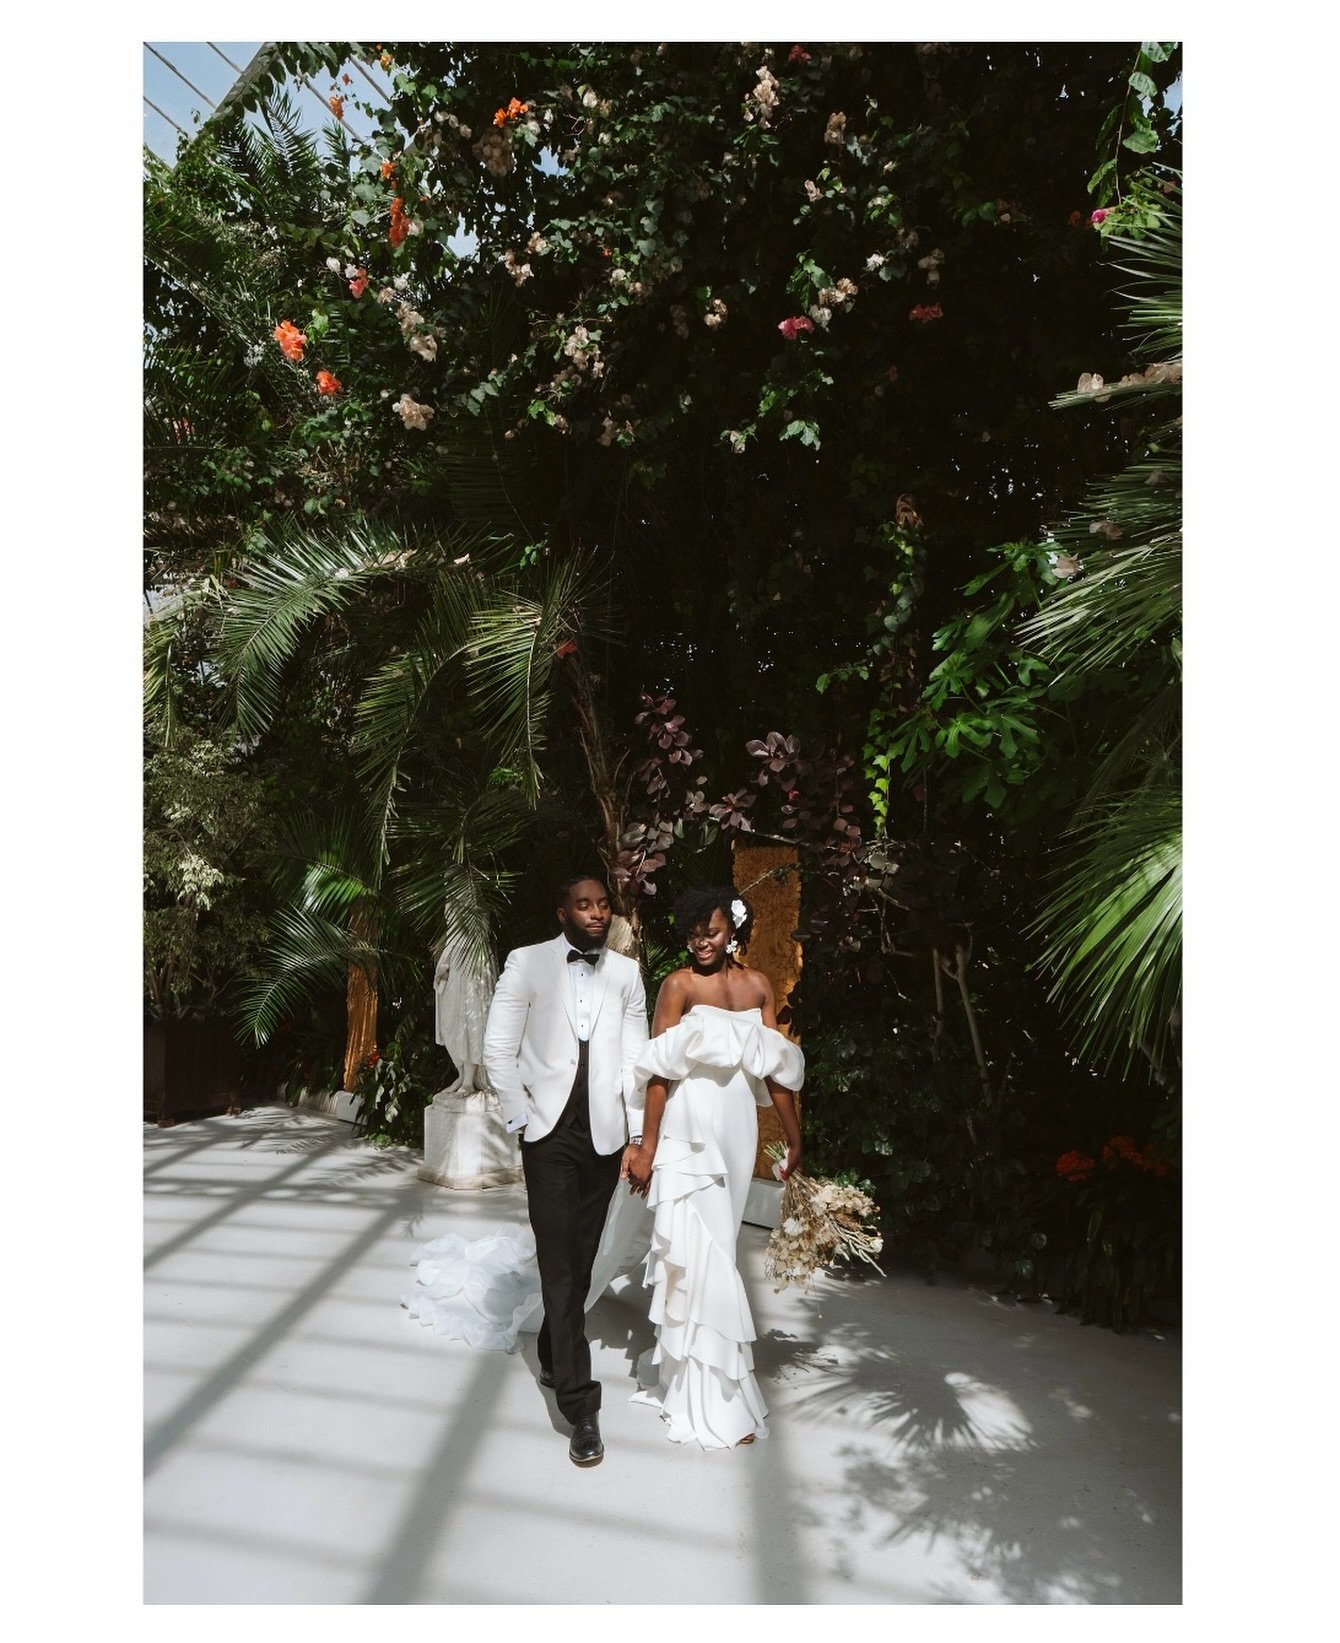 The light in the Palm House ✨ @seftonparkpalmhouse 

📍Liverpool, UK

Photography @baselerandholmes 
Venue @seftonparkpalmhouse 
Dress @charlottesandsbridal 
Suit @groomformal 
Accessories @claireaustinengland 
Styling @zazevents 
Couple @claudiabent